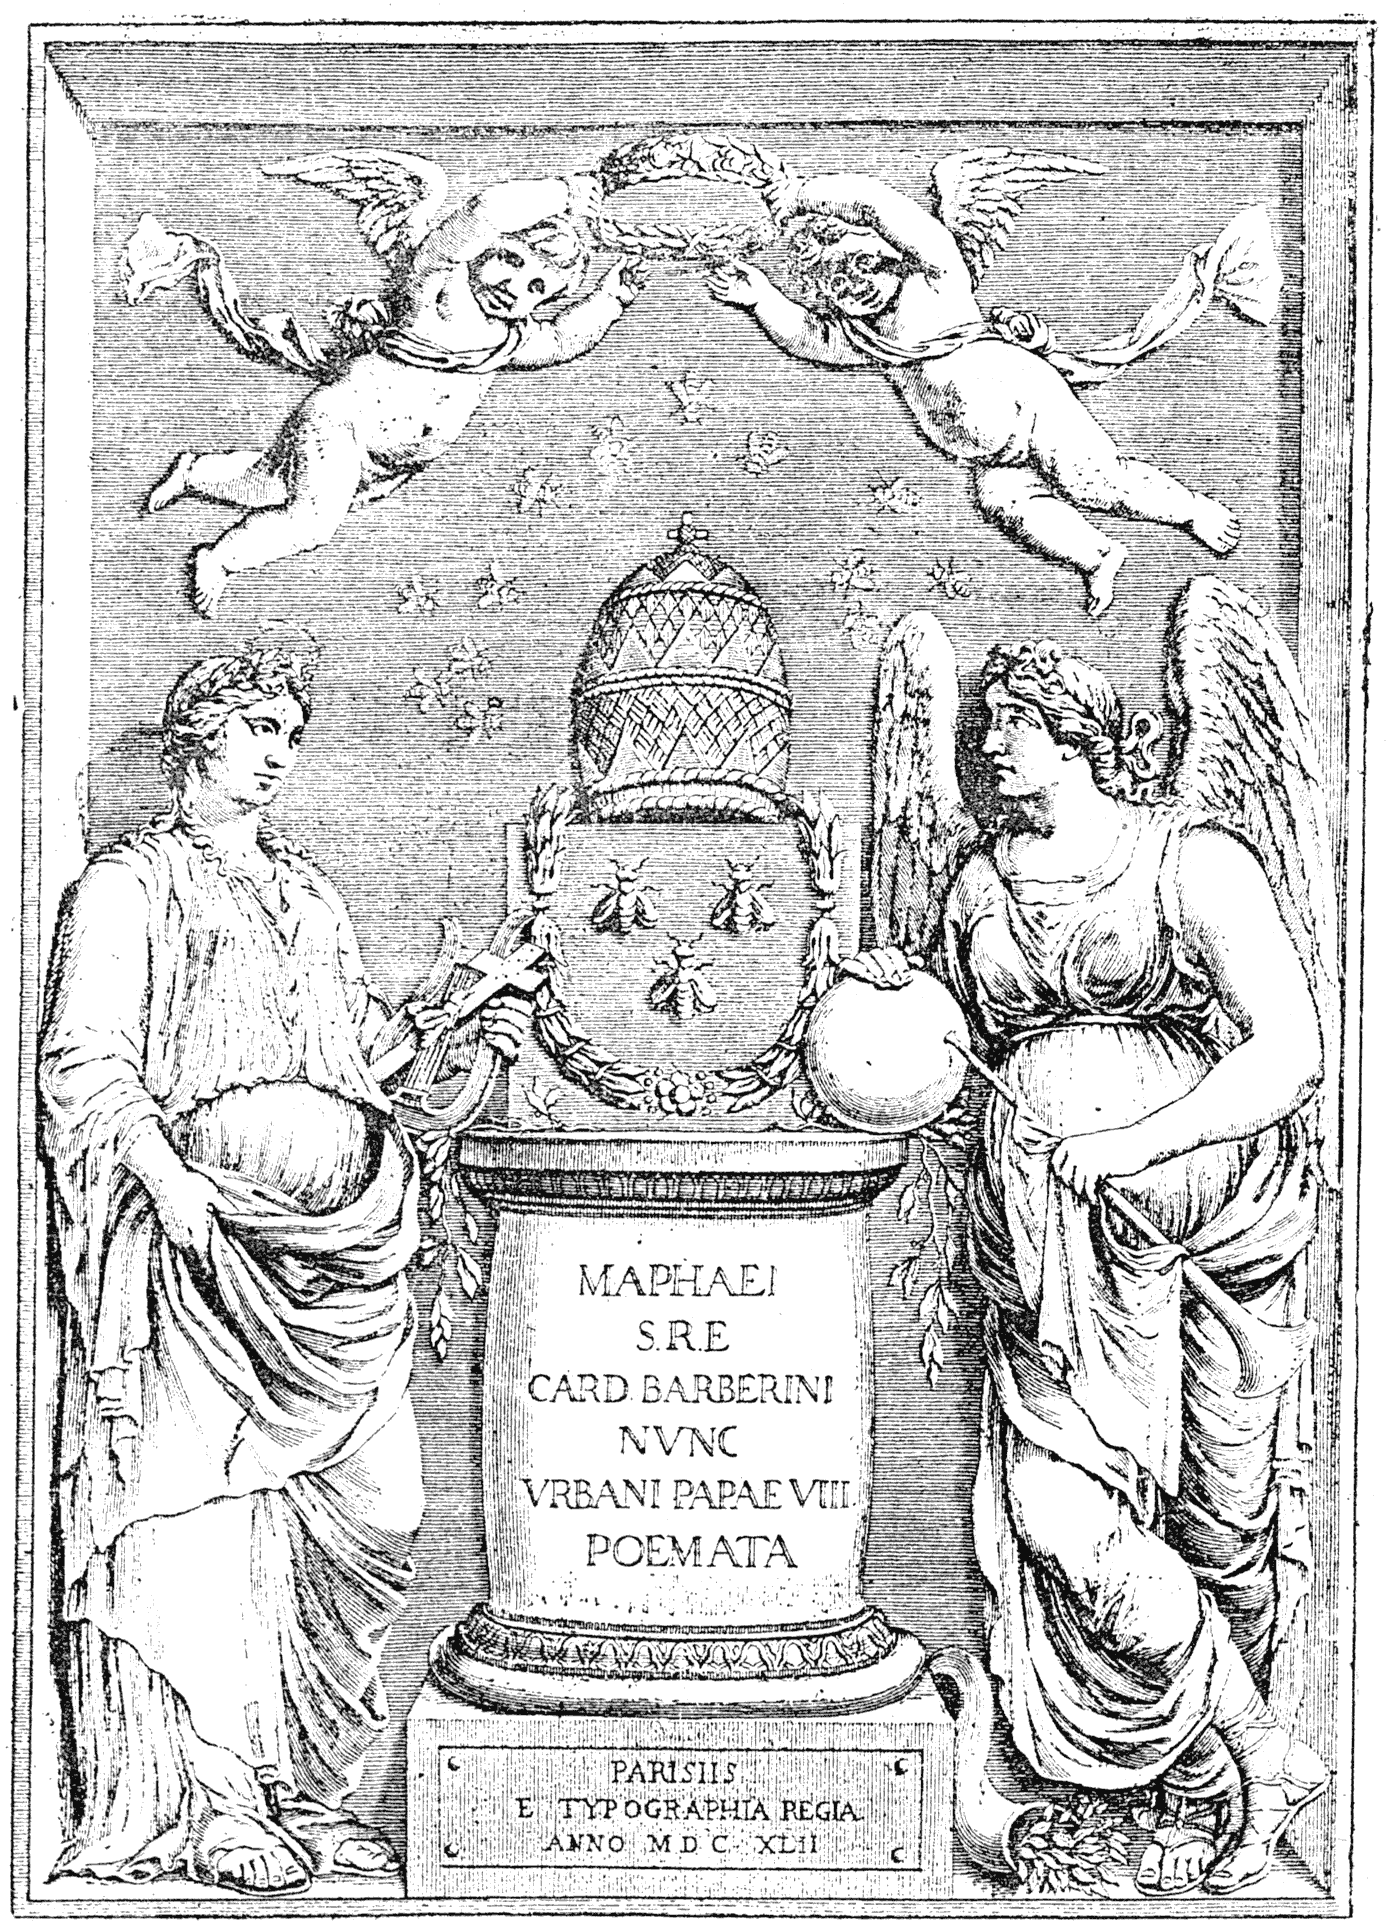 Claude Mellan title page engraving, 1642, 'Poesies'. From Henri Bouchot 'The Printed Book', 1887, page 157, published size in Bouchot 8.4 cm wide by 12 cm high.